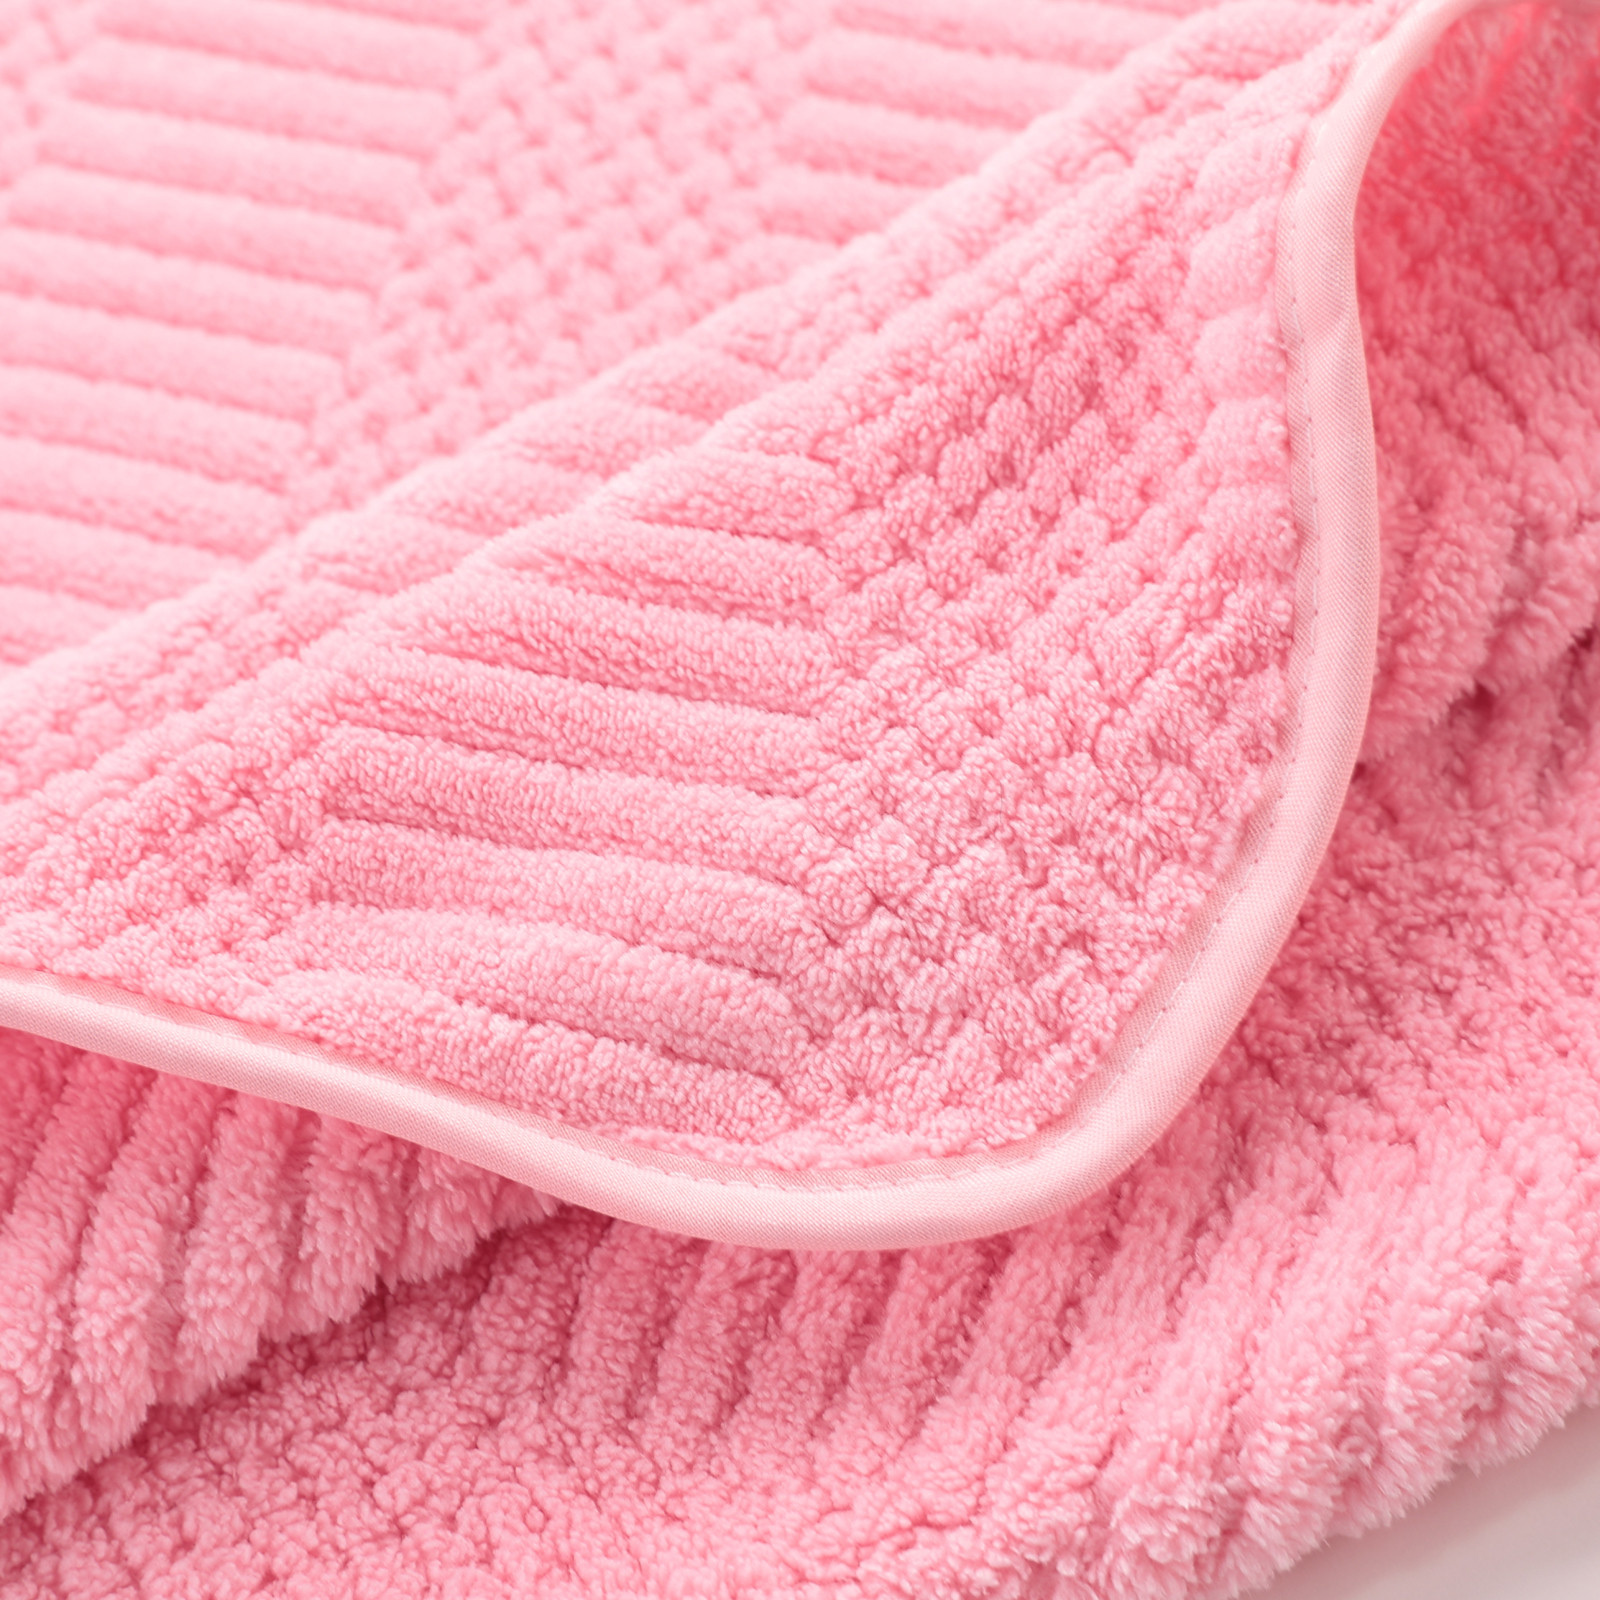 Kuber Industries Bath Towel For Men, Women|280 GSM|Extra Soft & Fade Resistant|Polyester Towels For Bath|Waffle Texture|Bathing Towel, Bath Sheet (Pink)